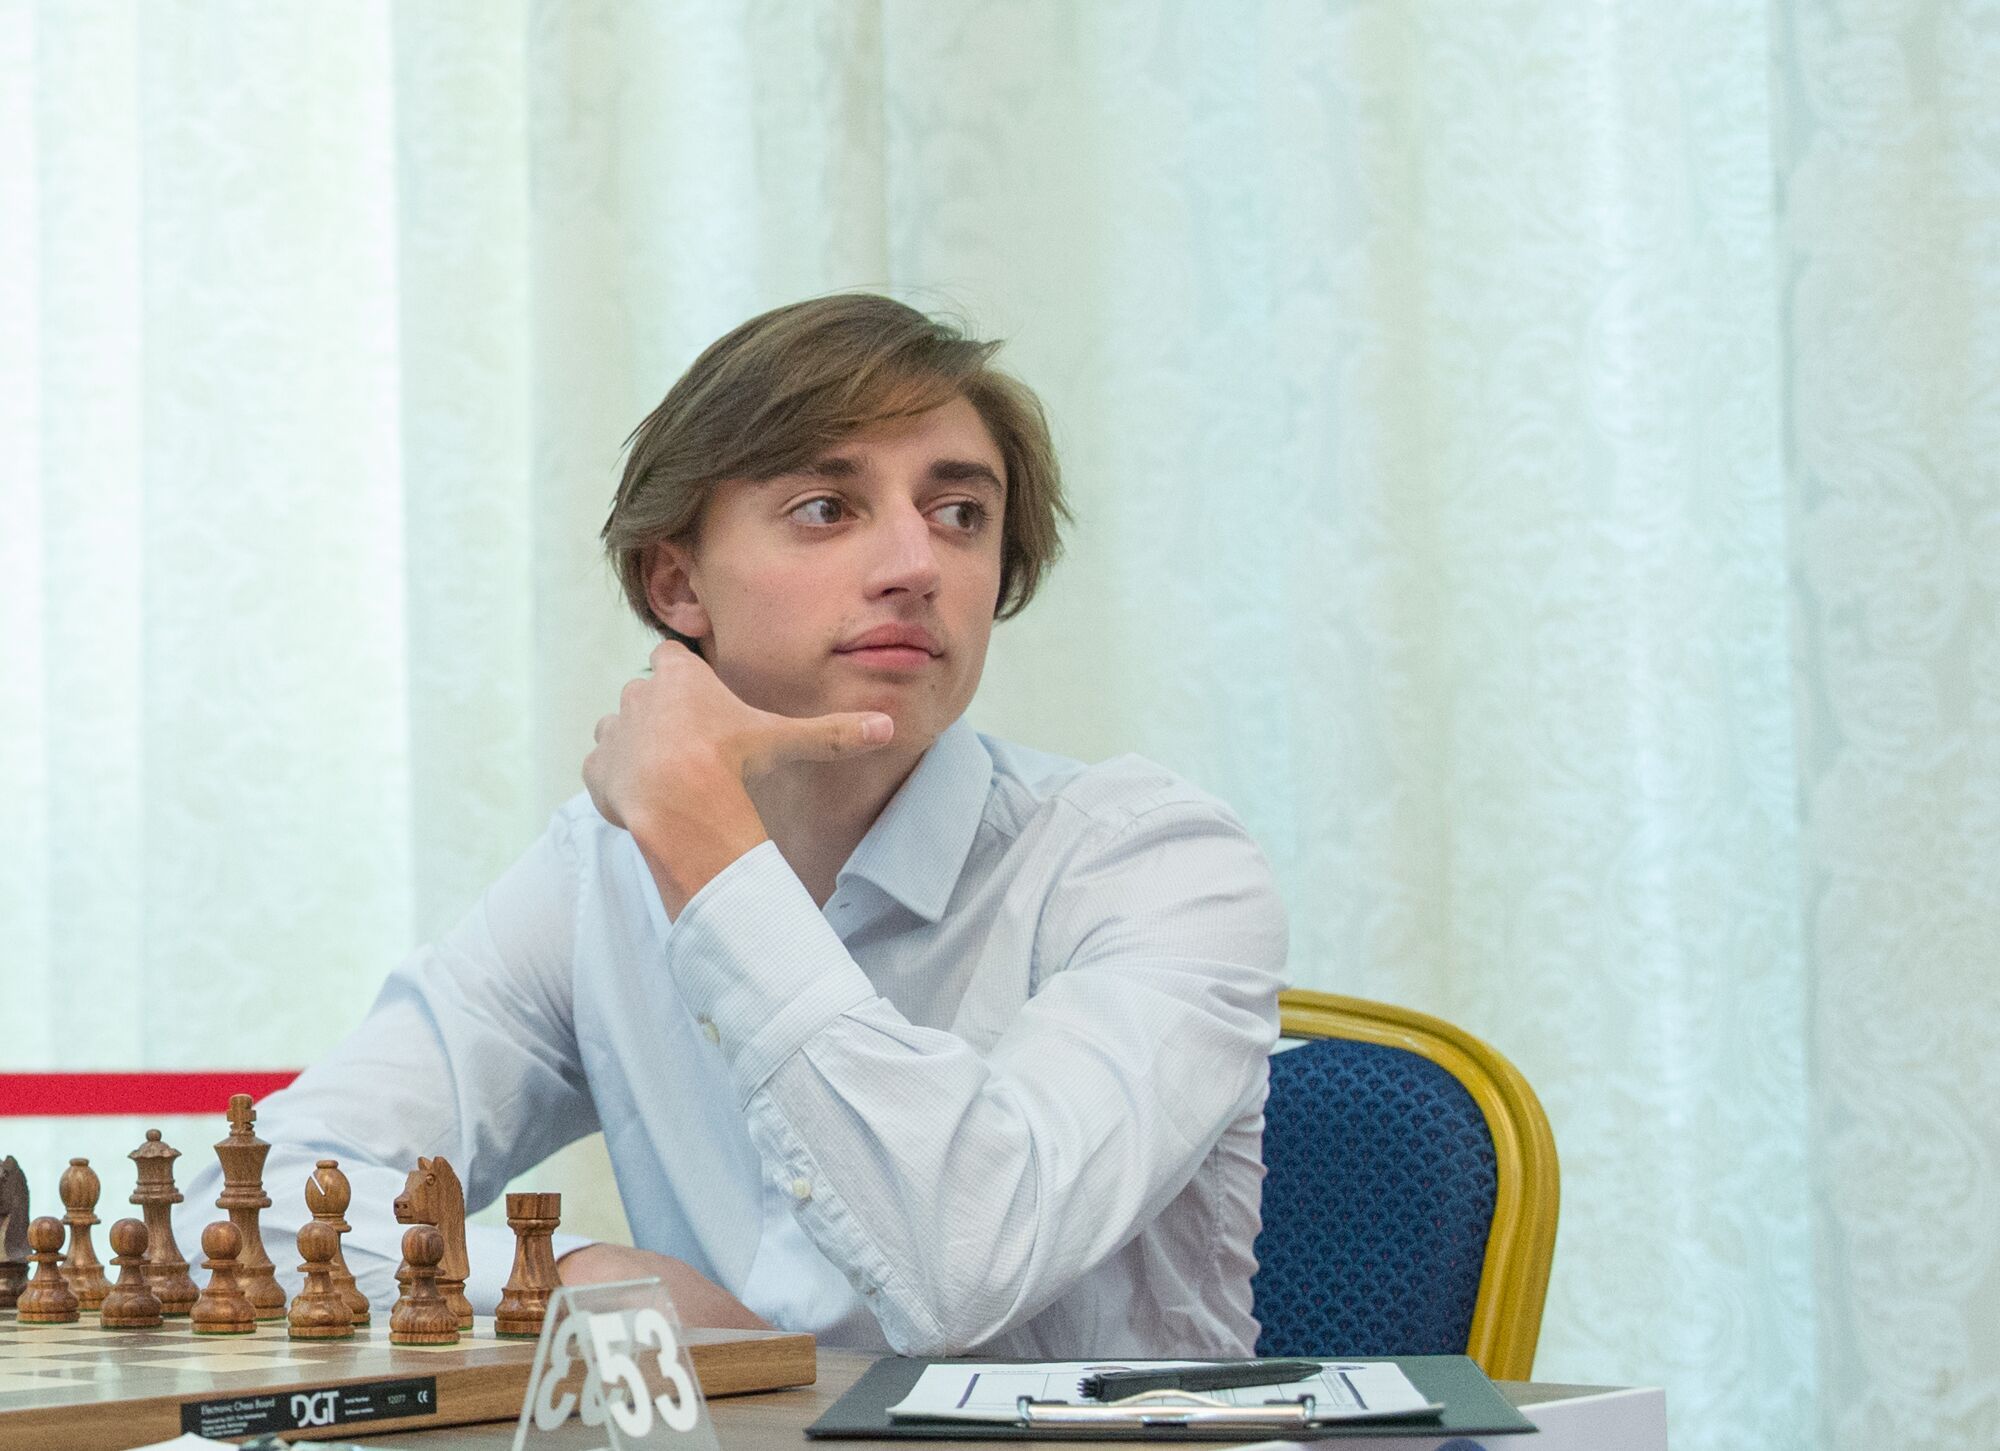 Is it only me or does Daniil Dubov ( Russian Chess Super GM